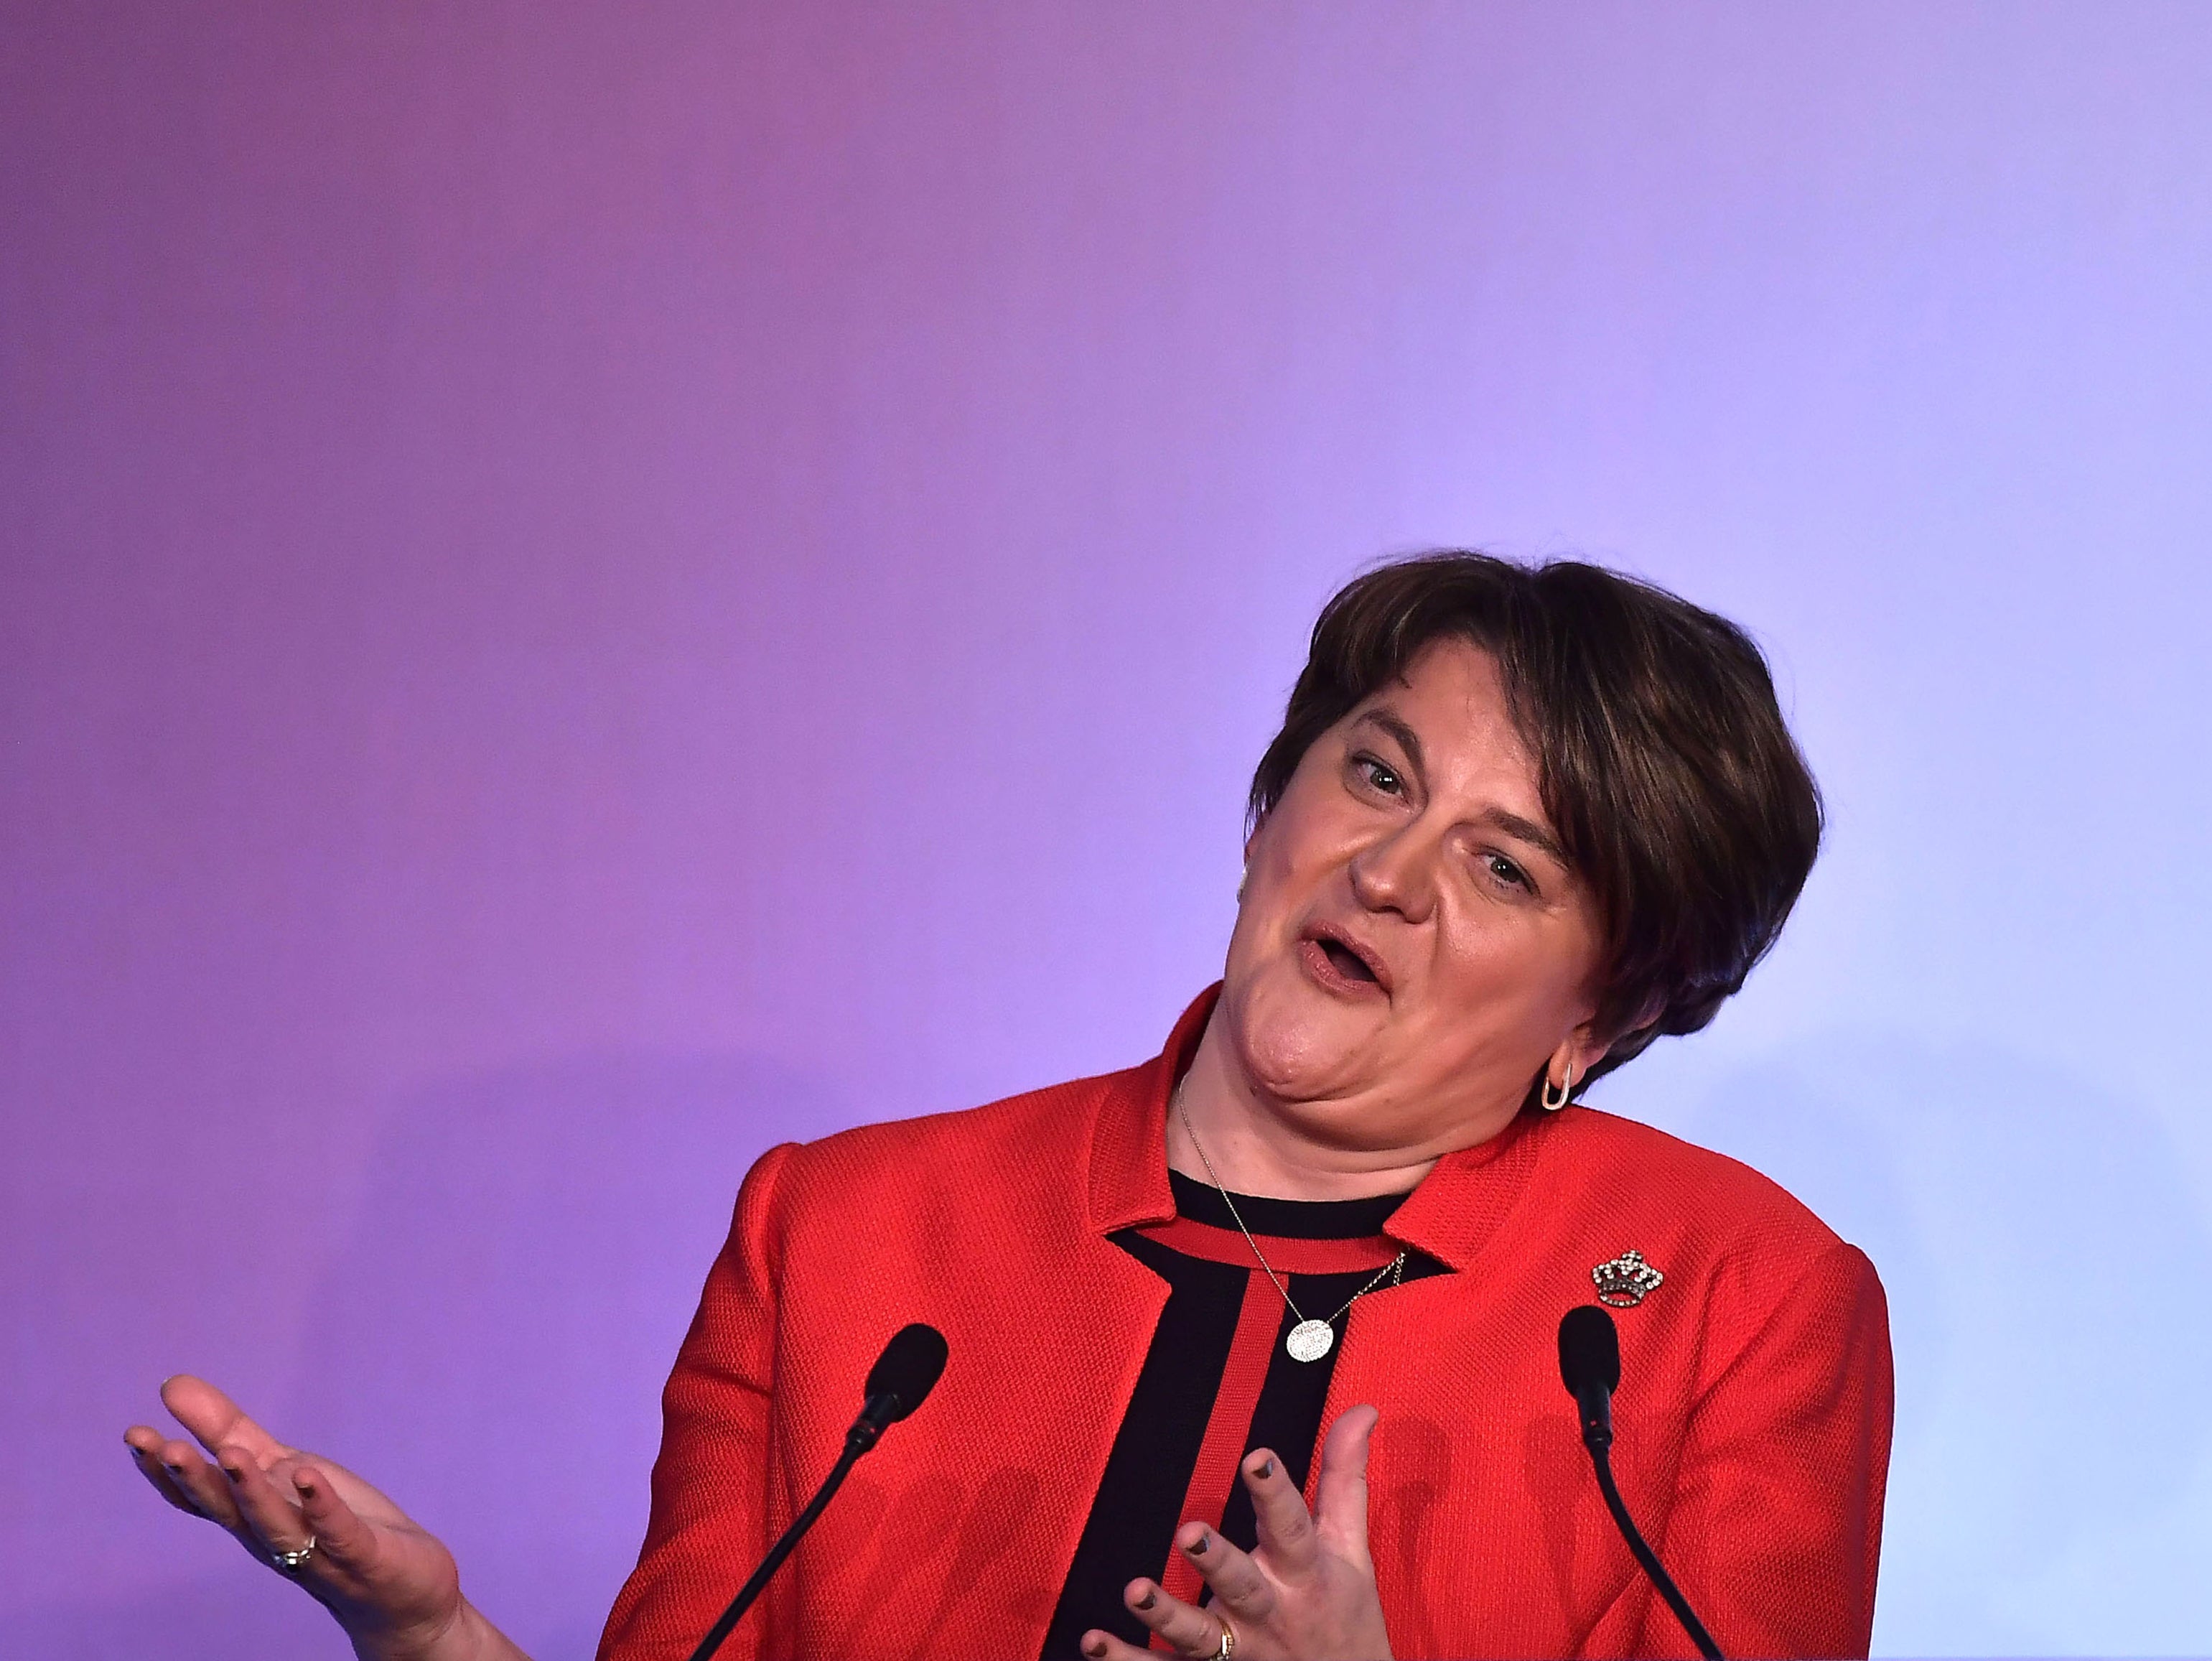 Arlene Foster has resigned as leader of the DUP